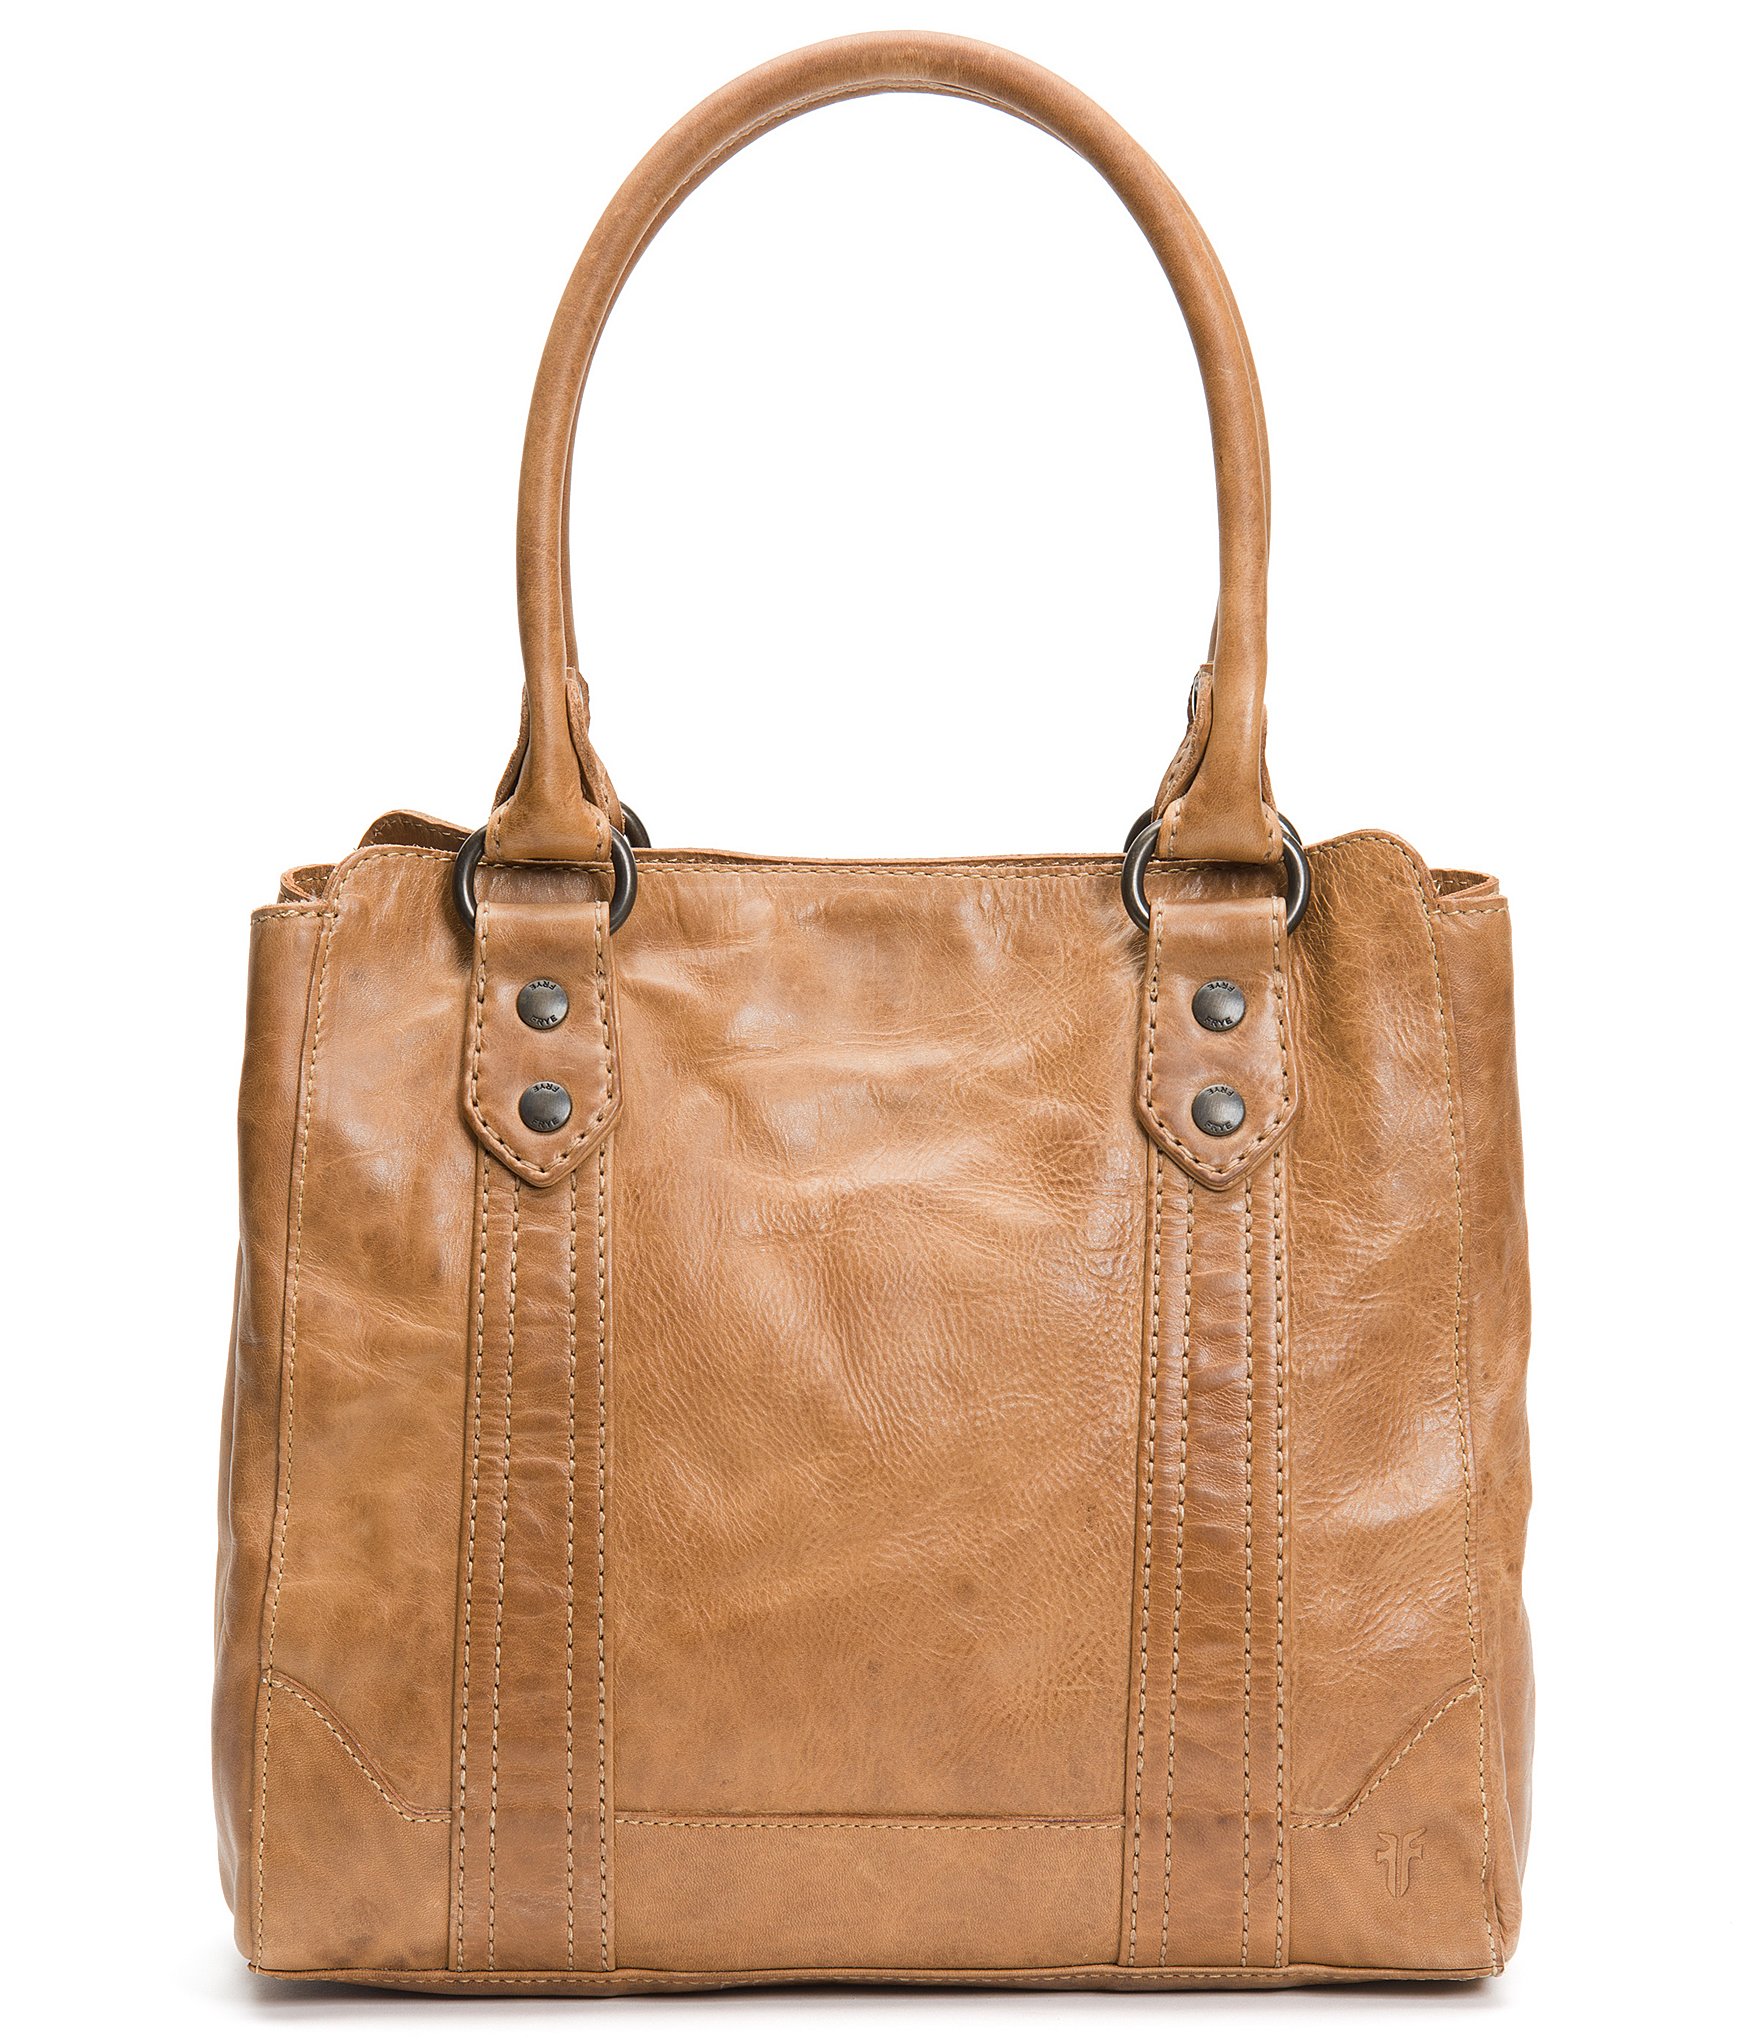 What's in my Frye Riviana Leather Tote Bag & Update on Lucy - YouTube